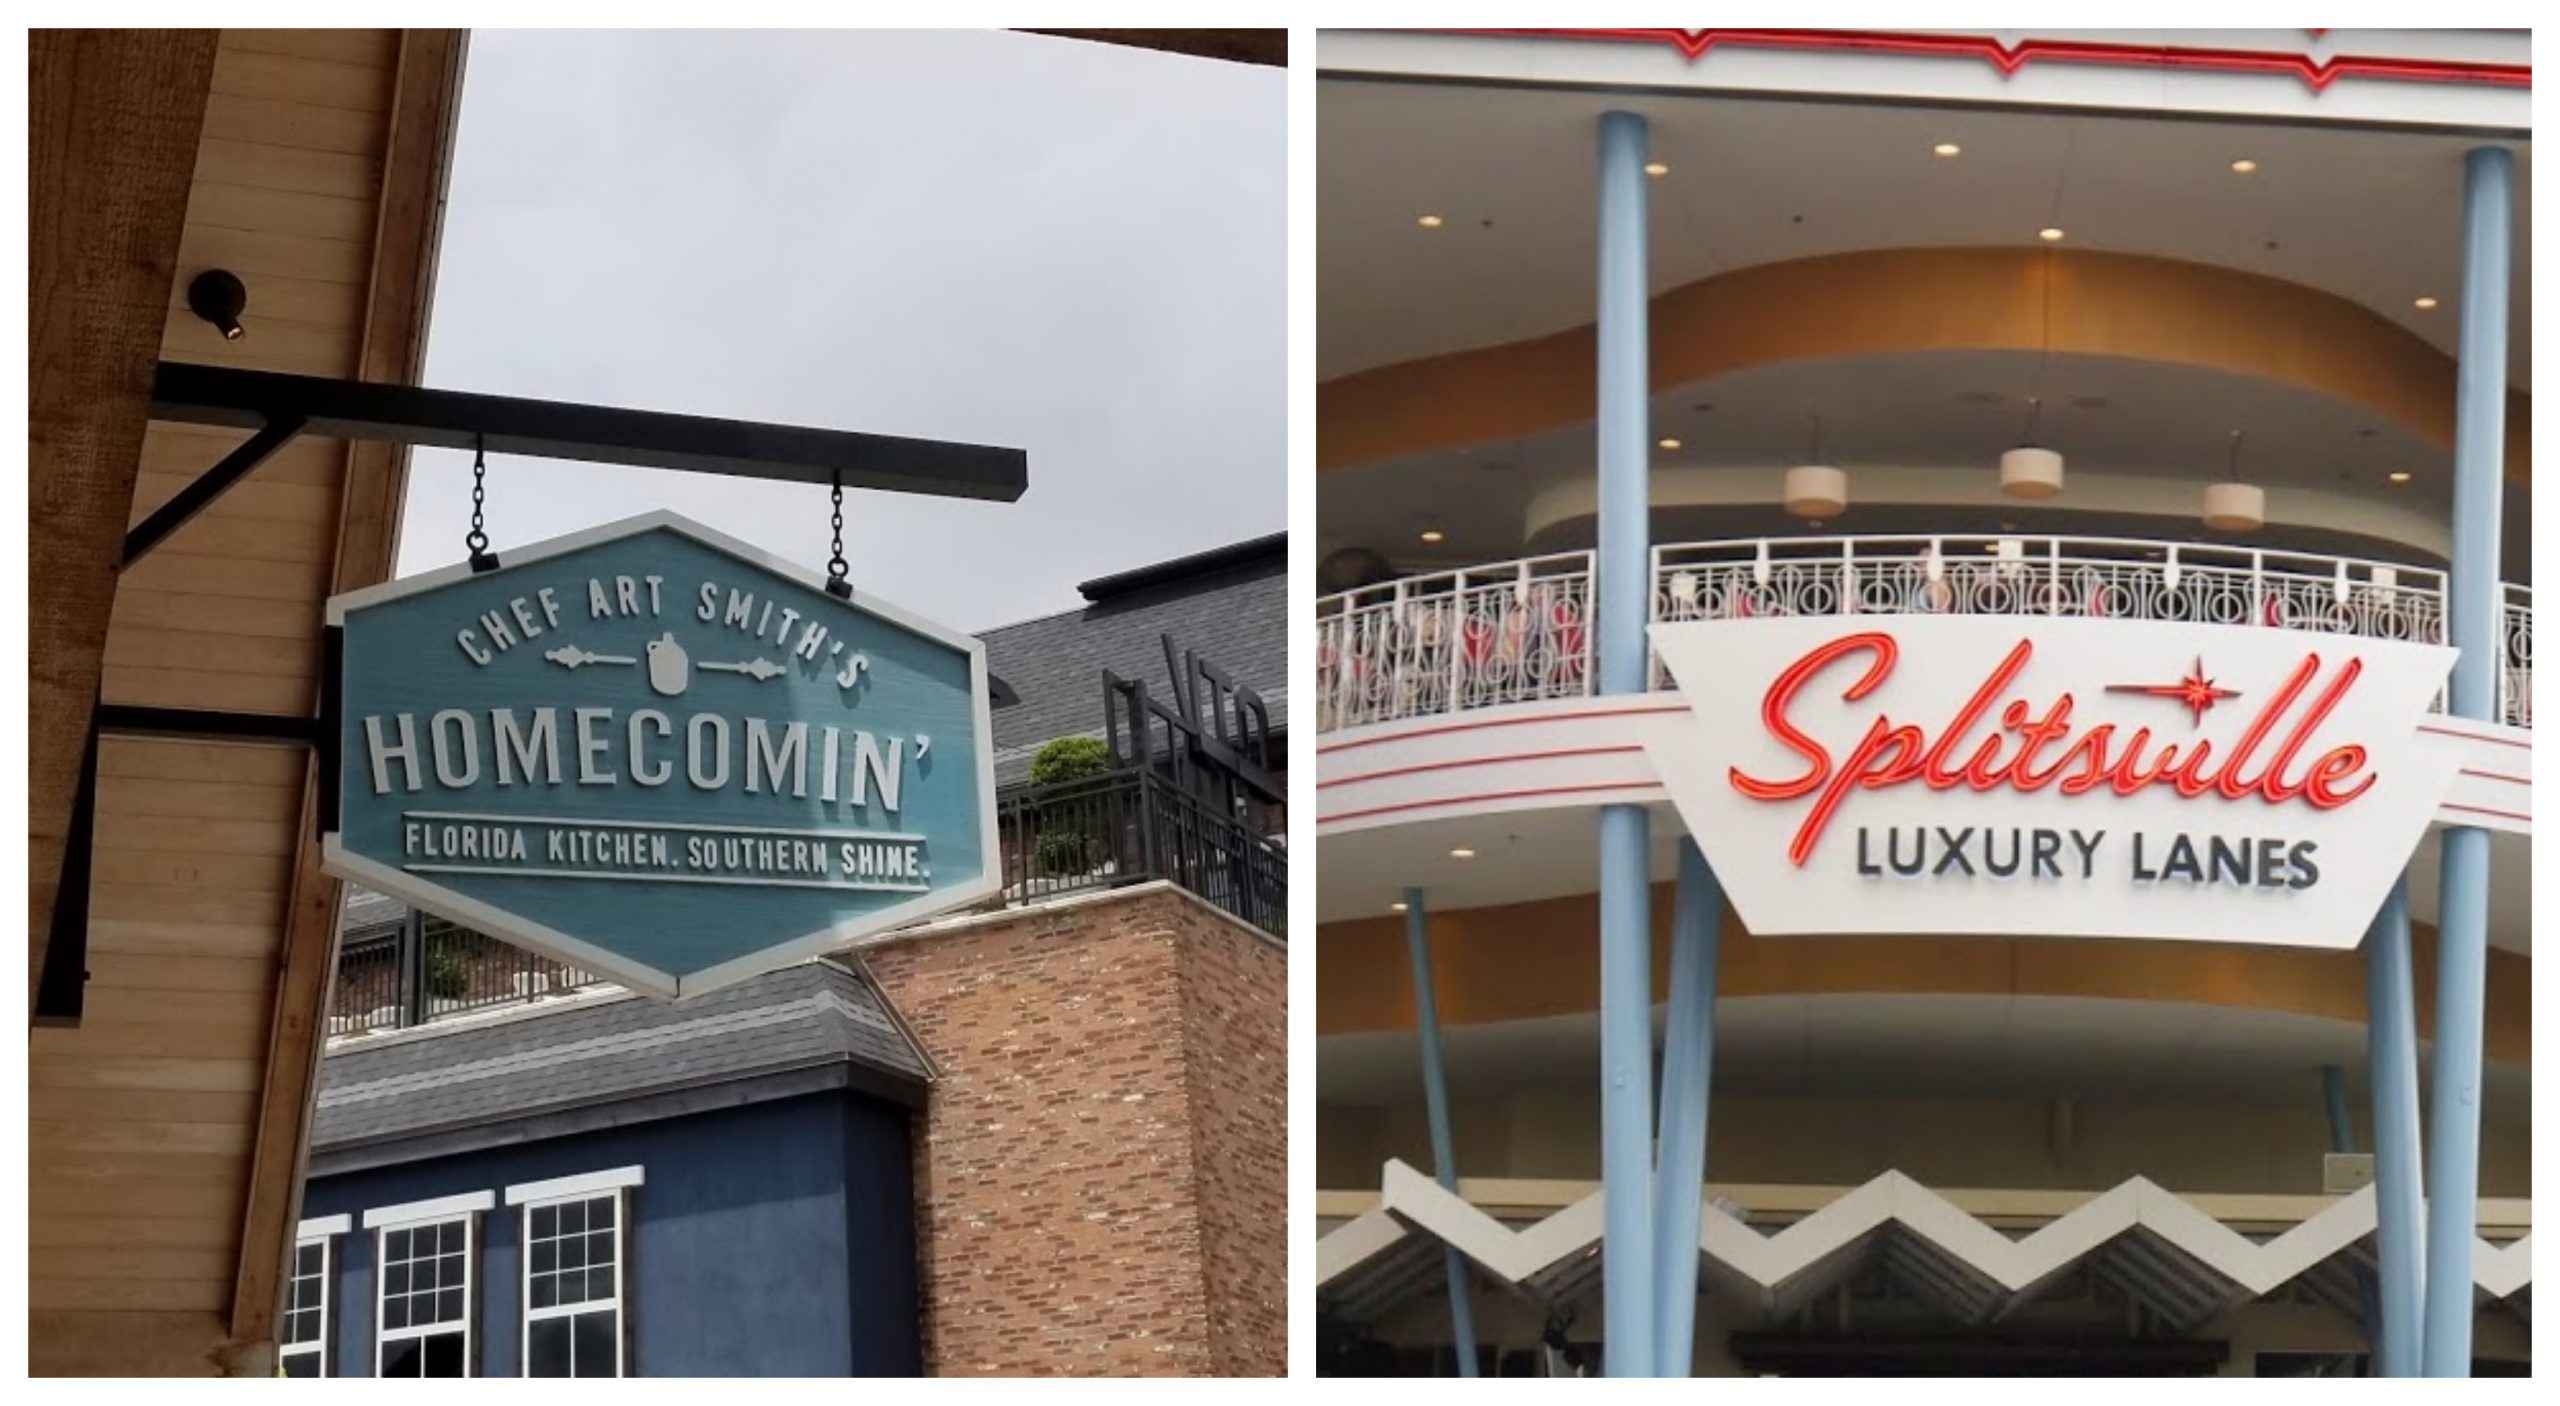 Another round of terminations at Disney Springs Restaurants